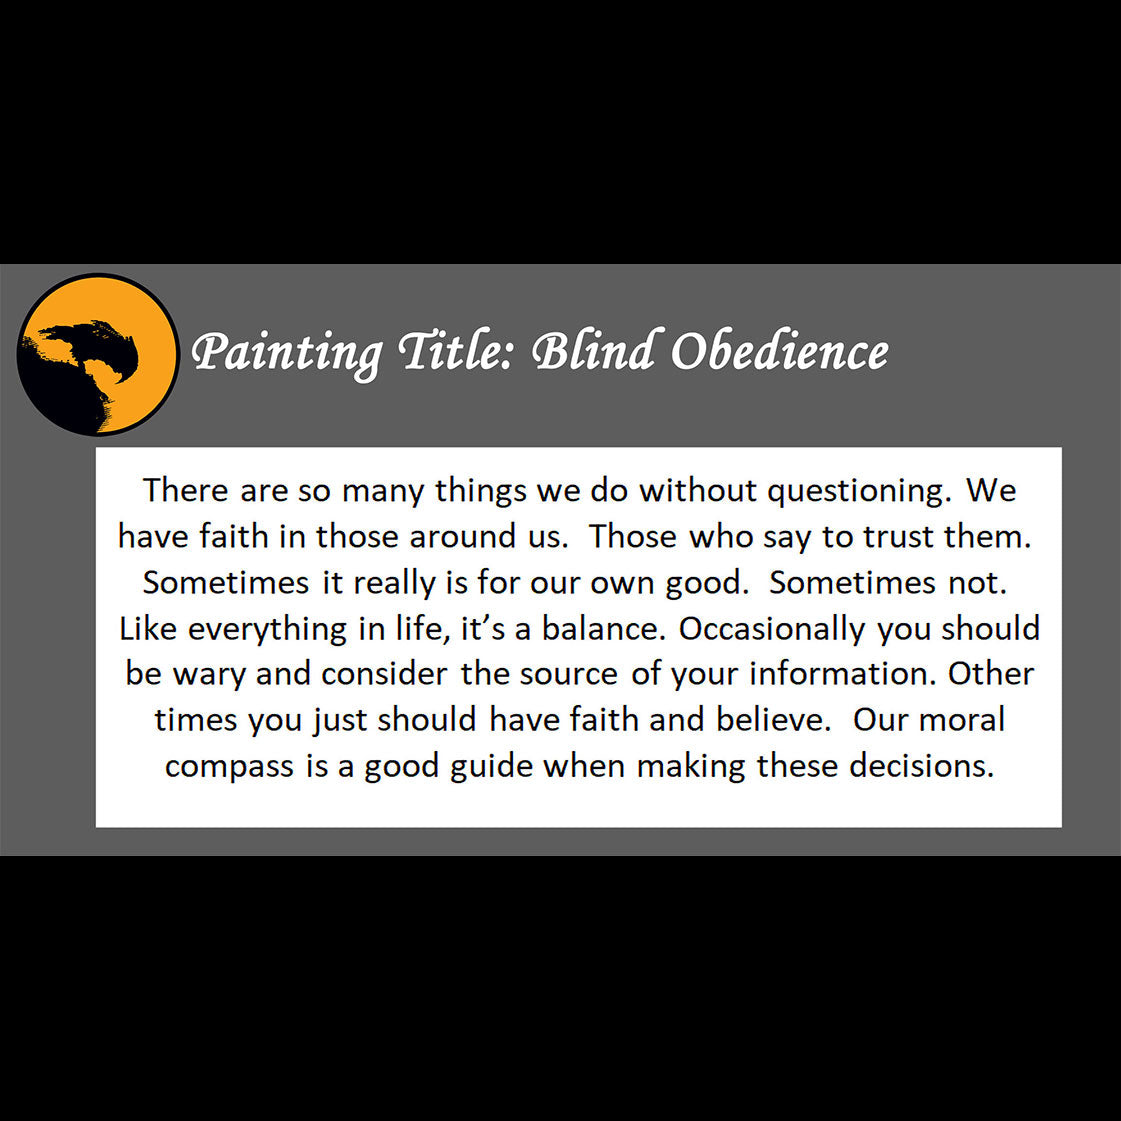 Blind Obedience - about trusting moral compass - 11x14, 11x17 Print